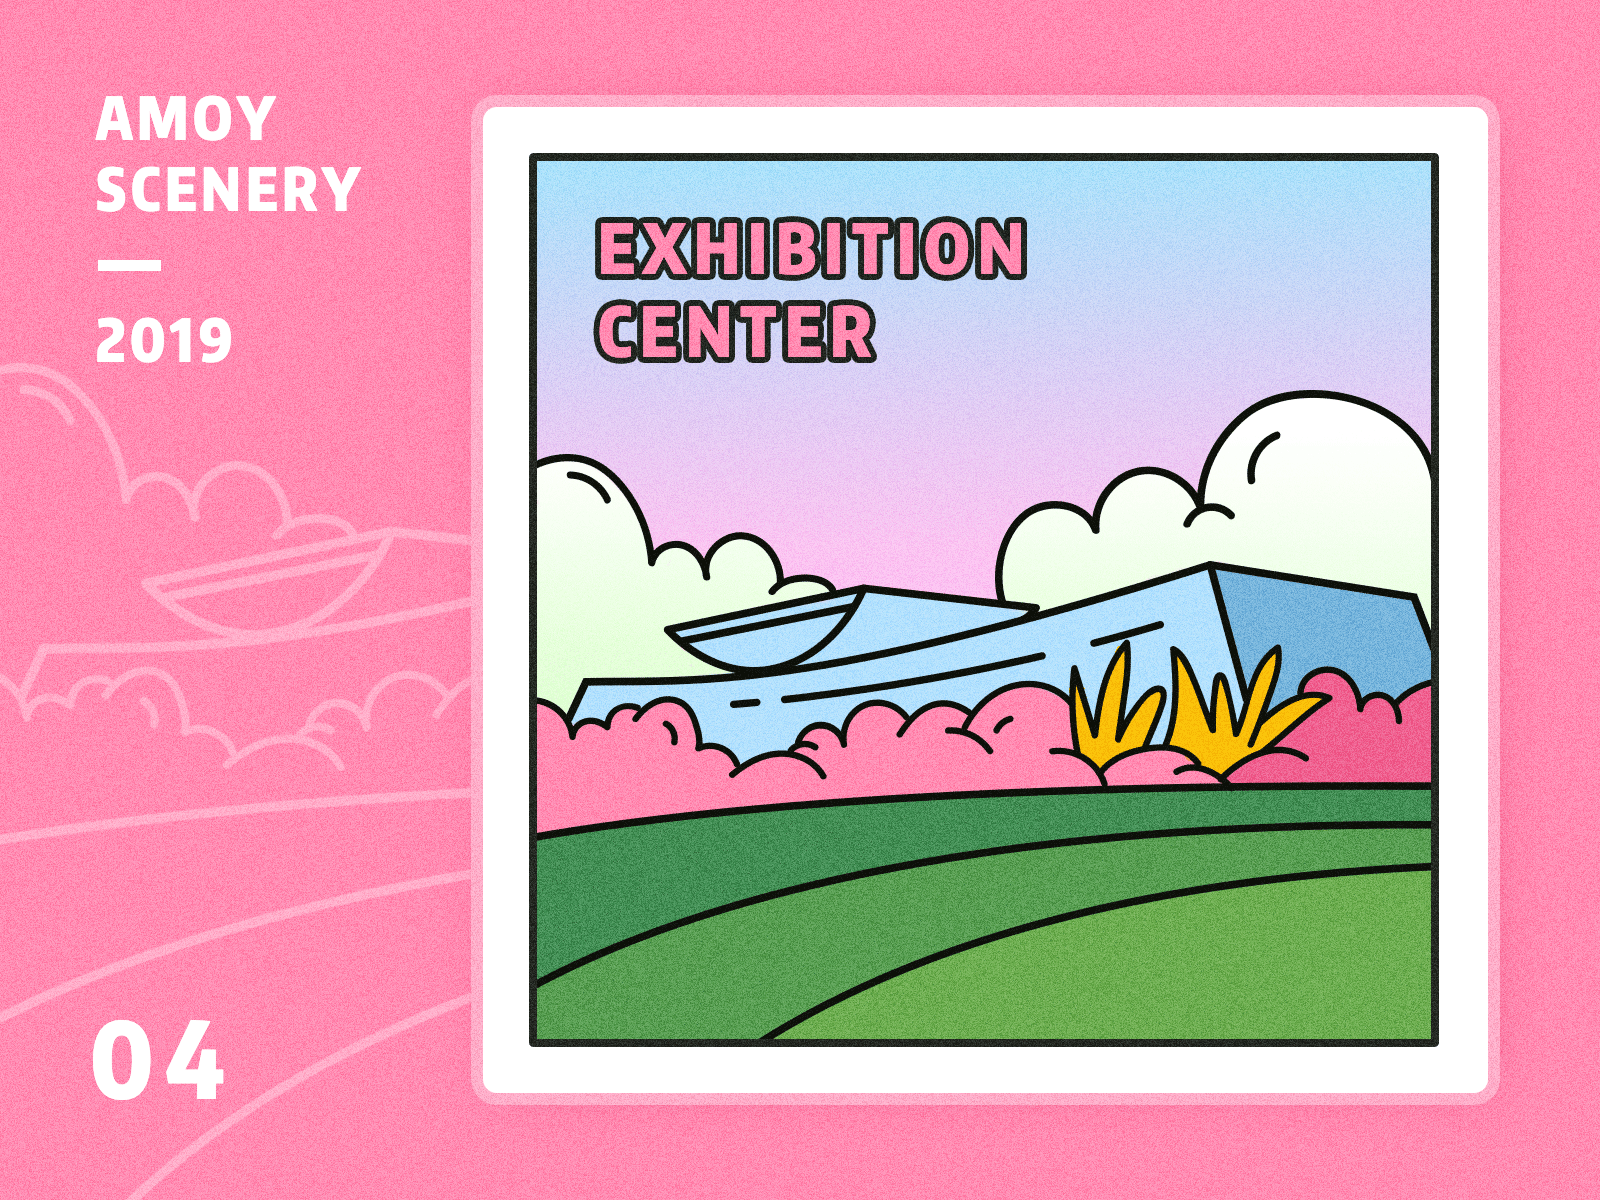 AMoy Scenery 2019 cloud conference exhibition center green ui 厦门 插图 设计